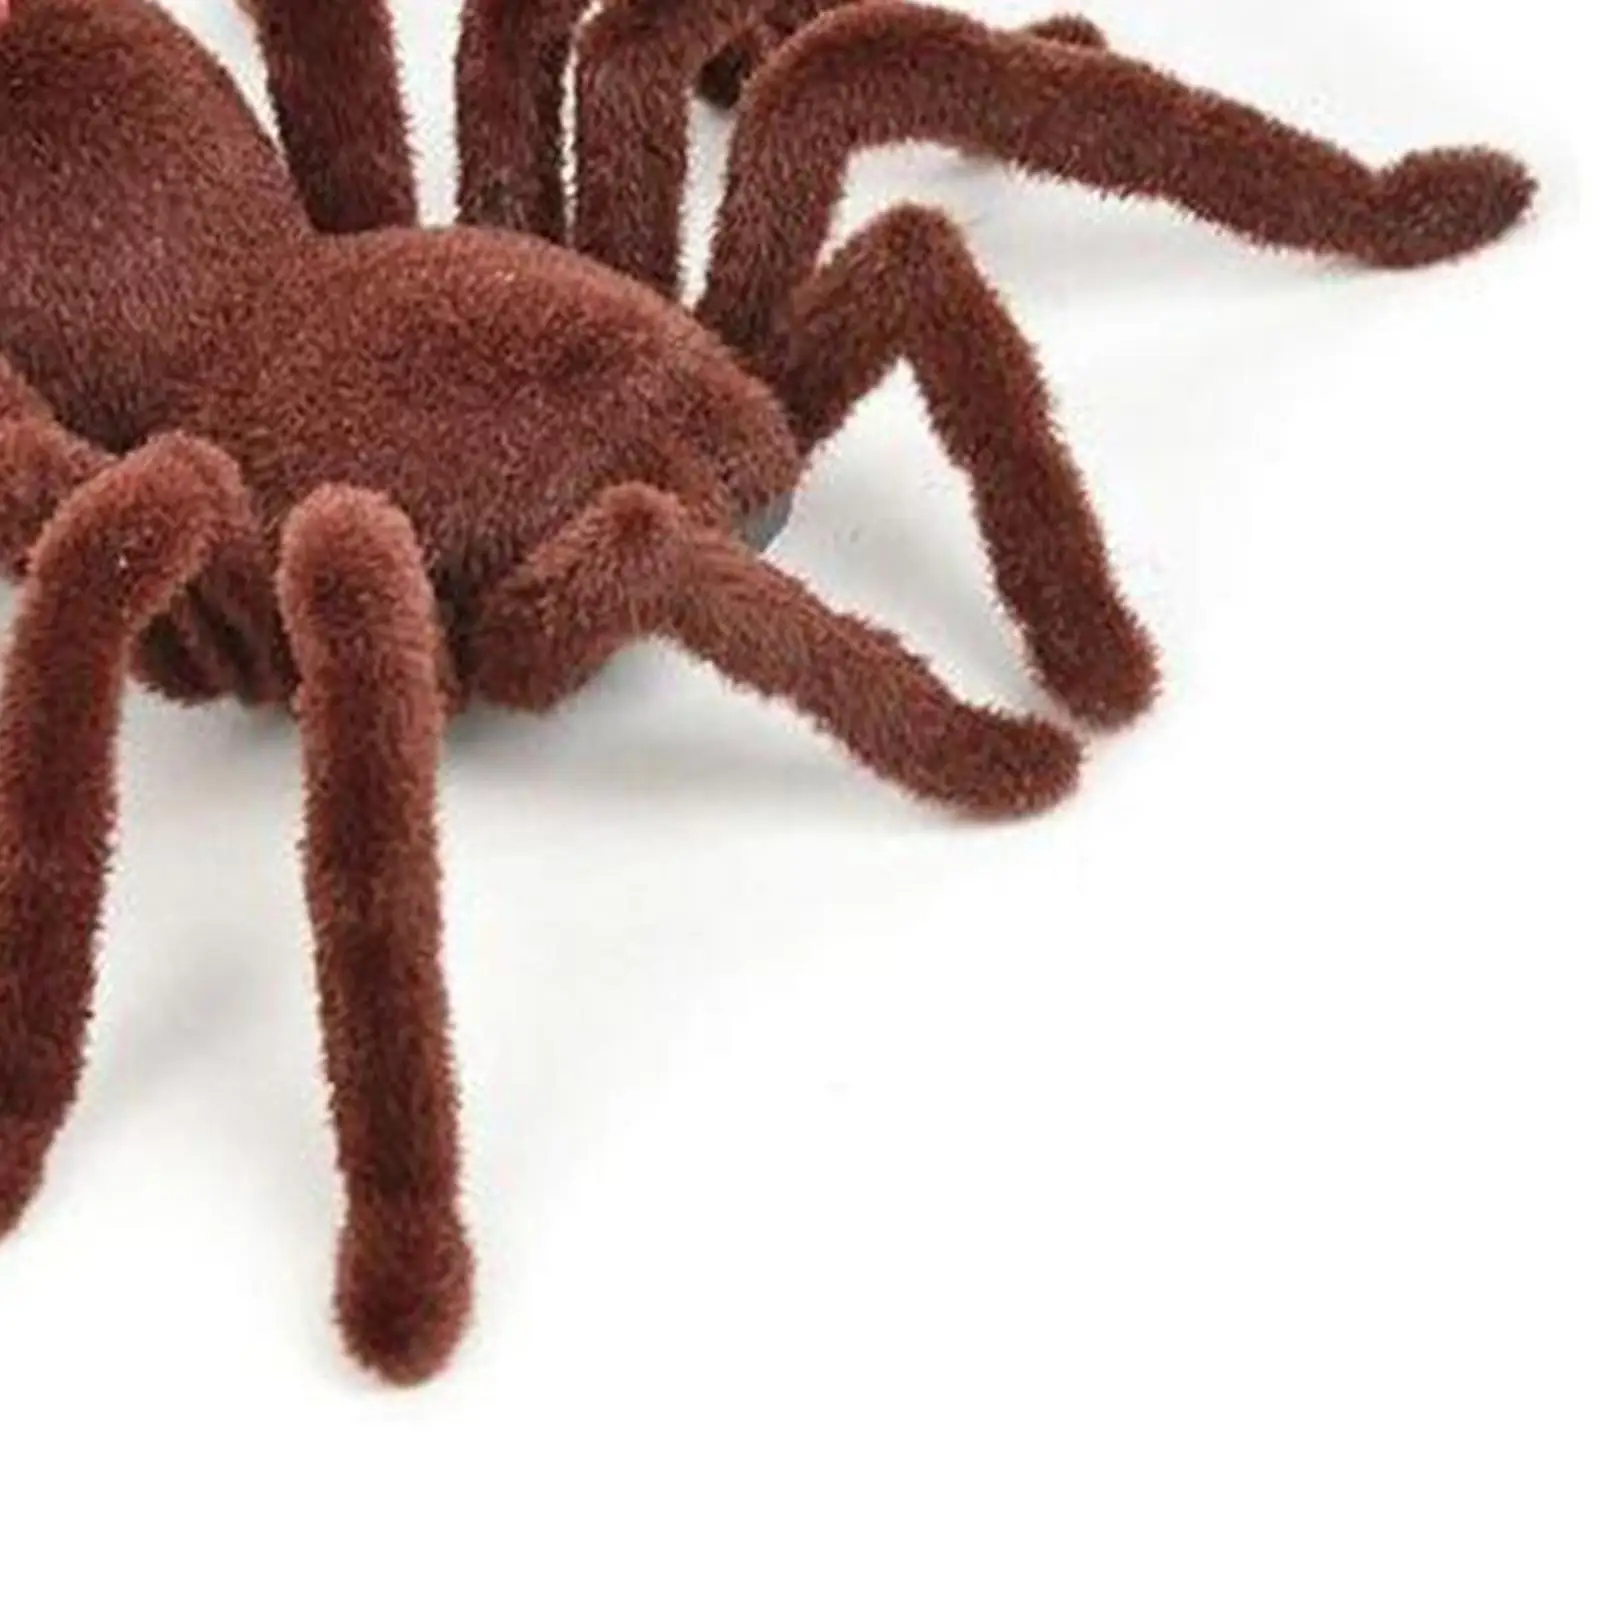 

Remote Control Scary Creepy Soft Plush Spider Infrared RC Gift black widow spider